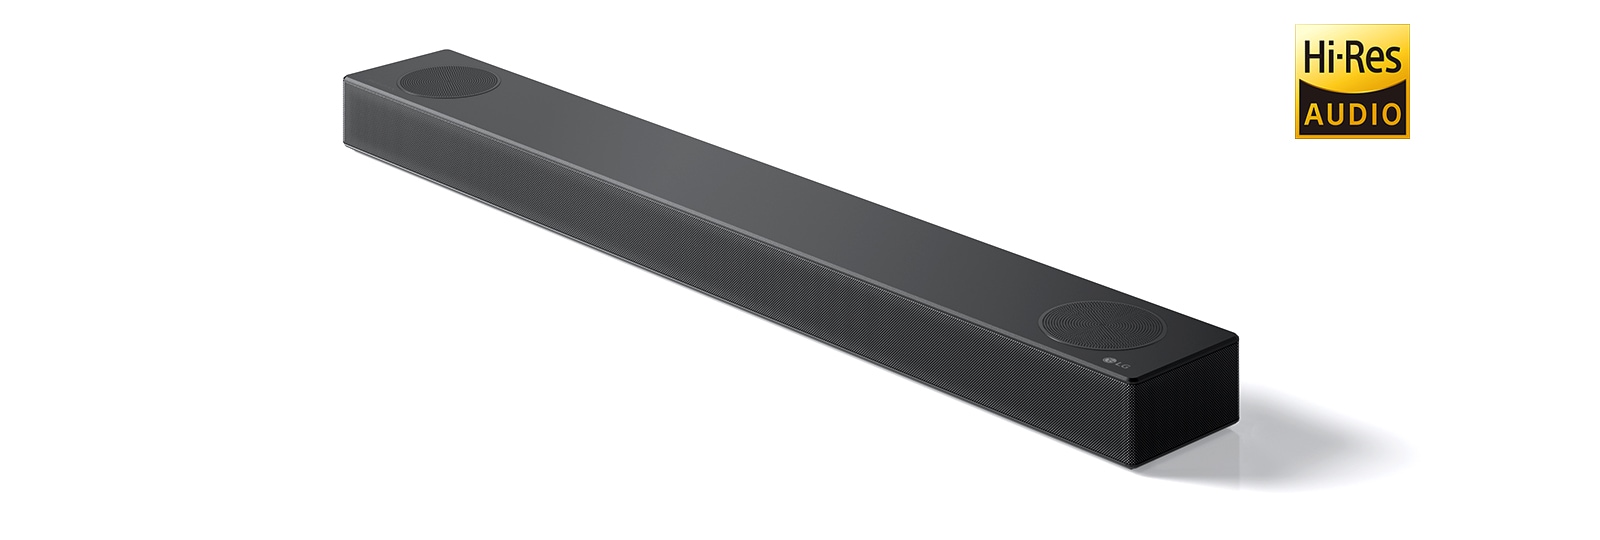 Full image of LG Sound bar right side with LG logo on the bottom right corner of a product.